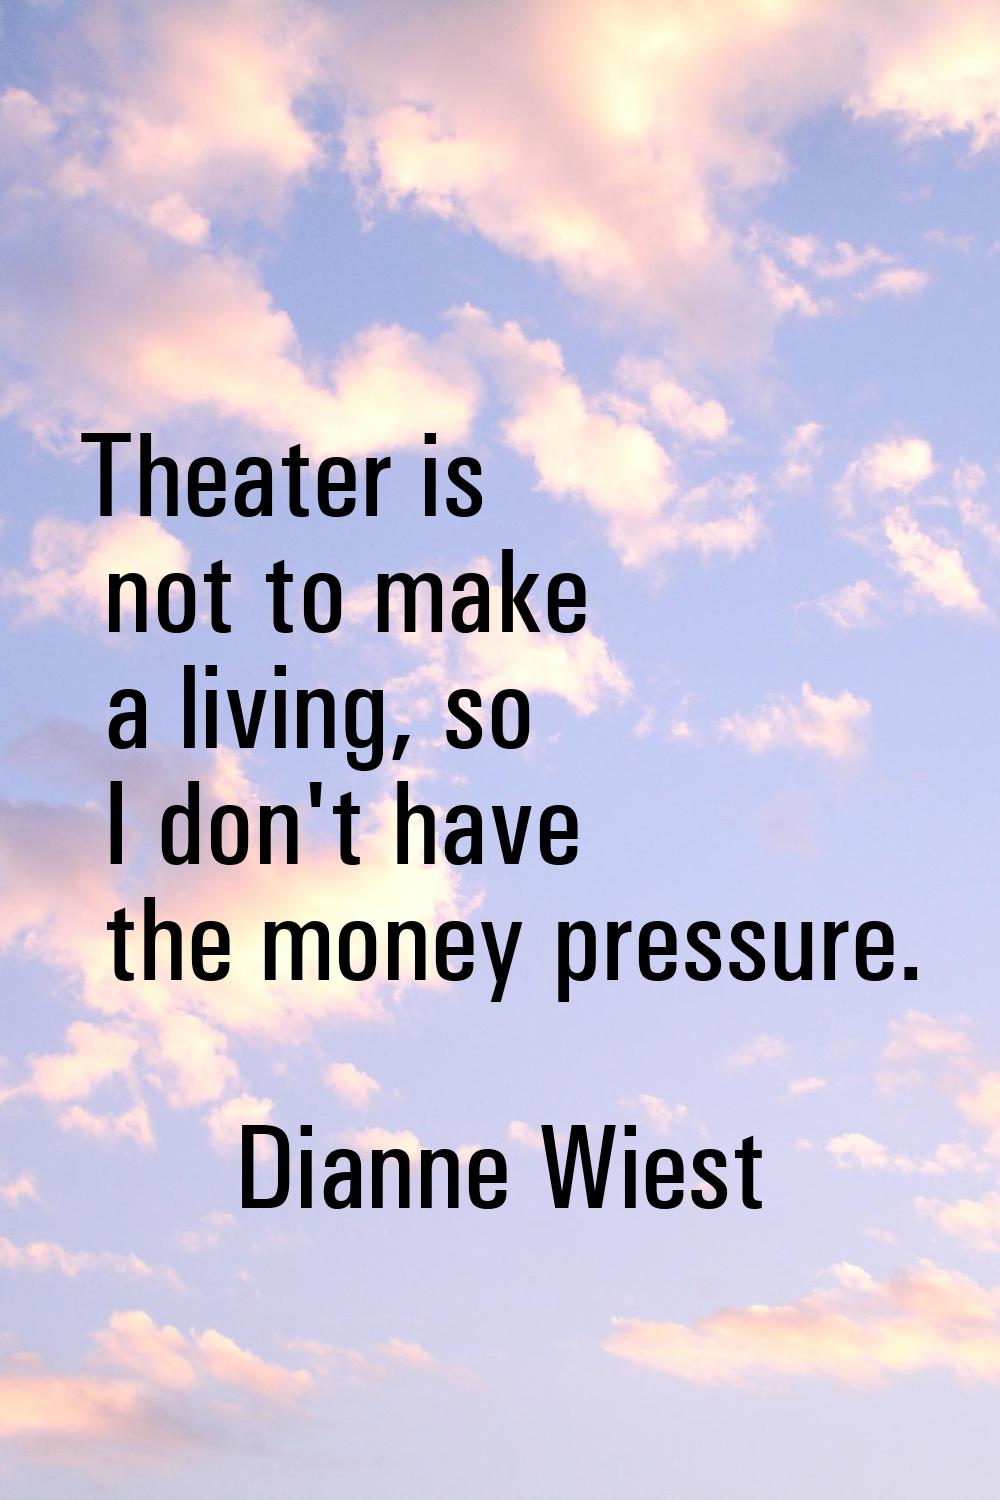 Theater is not to make a living, so I don't have the money pressure.